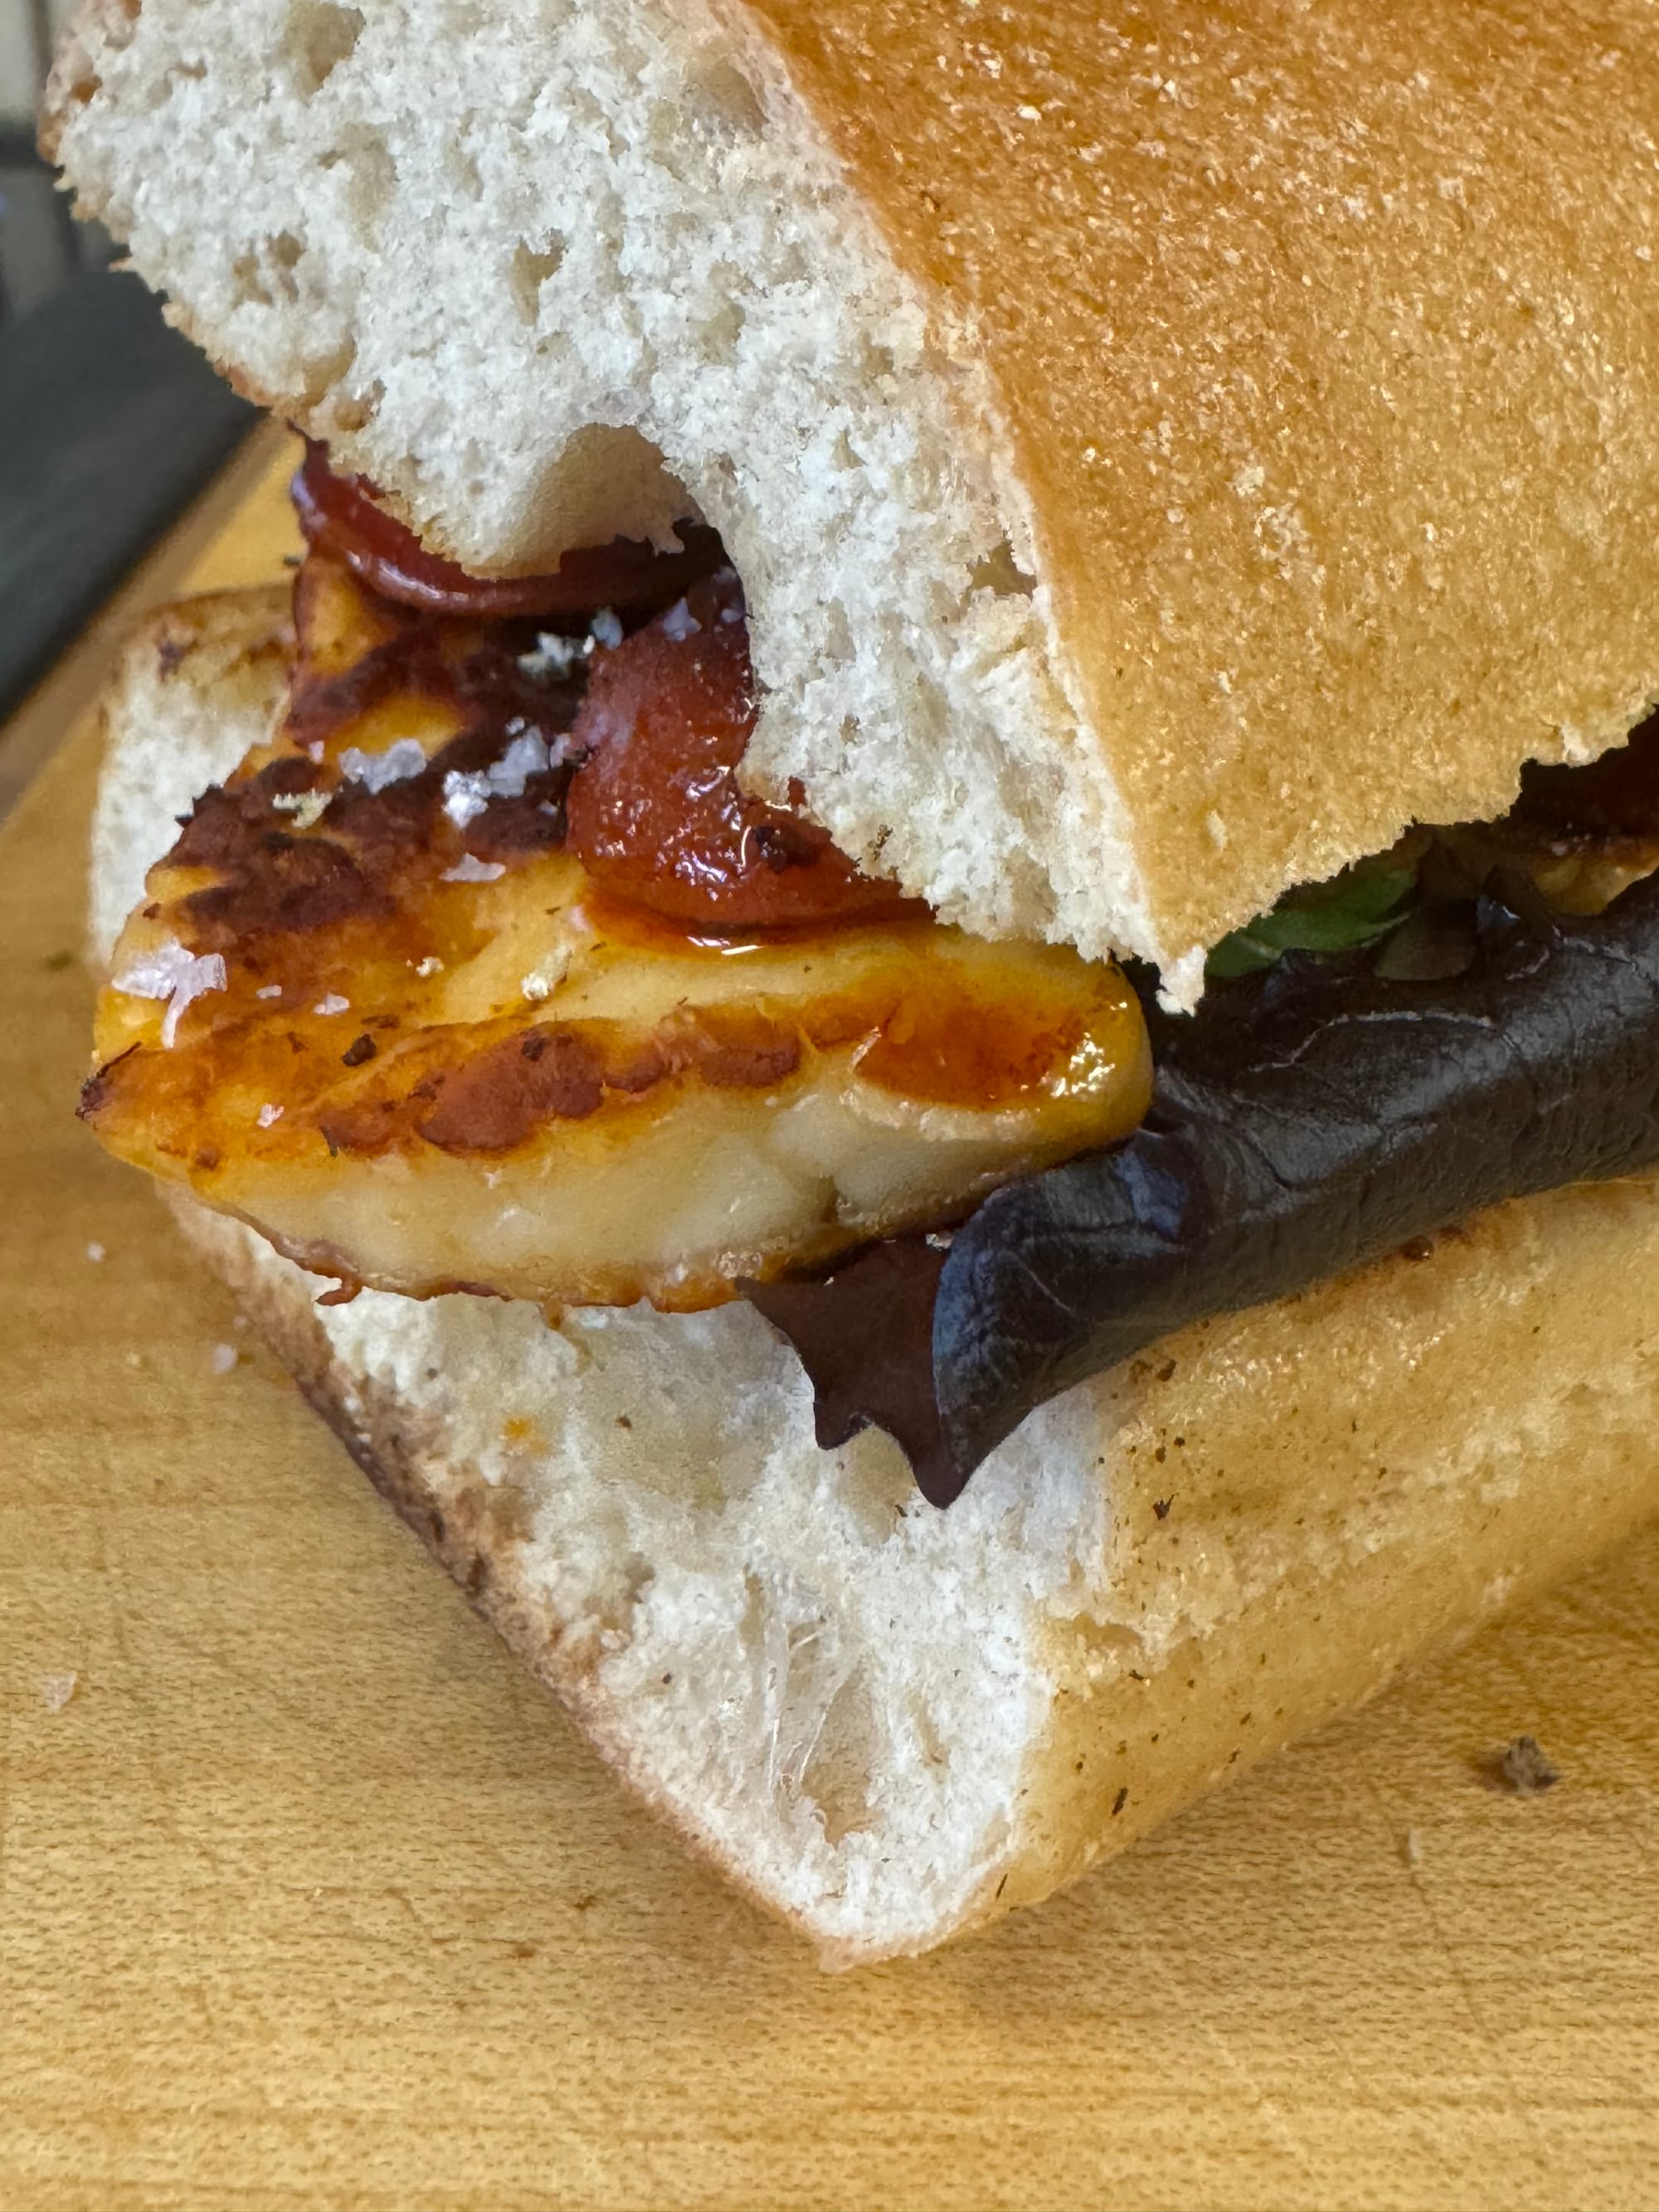 Chipotle Chorizo and Halloumi Baguette: A delicious sandwich with spicy chorizo, grilled halloumi, and chipotle sauce.